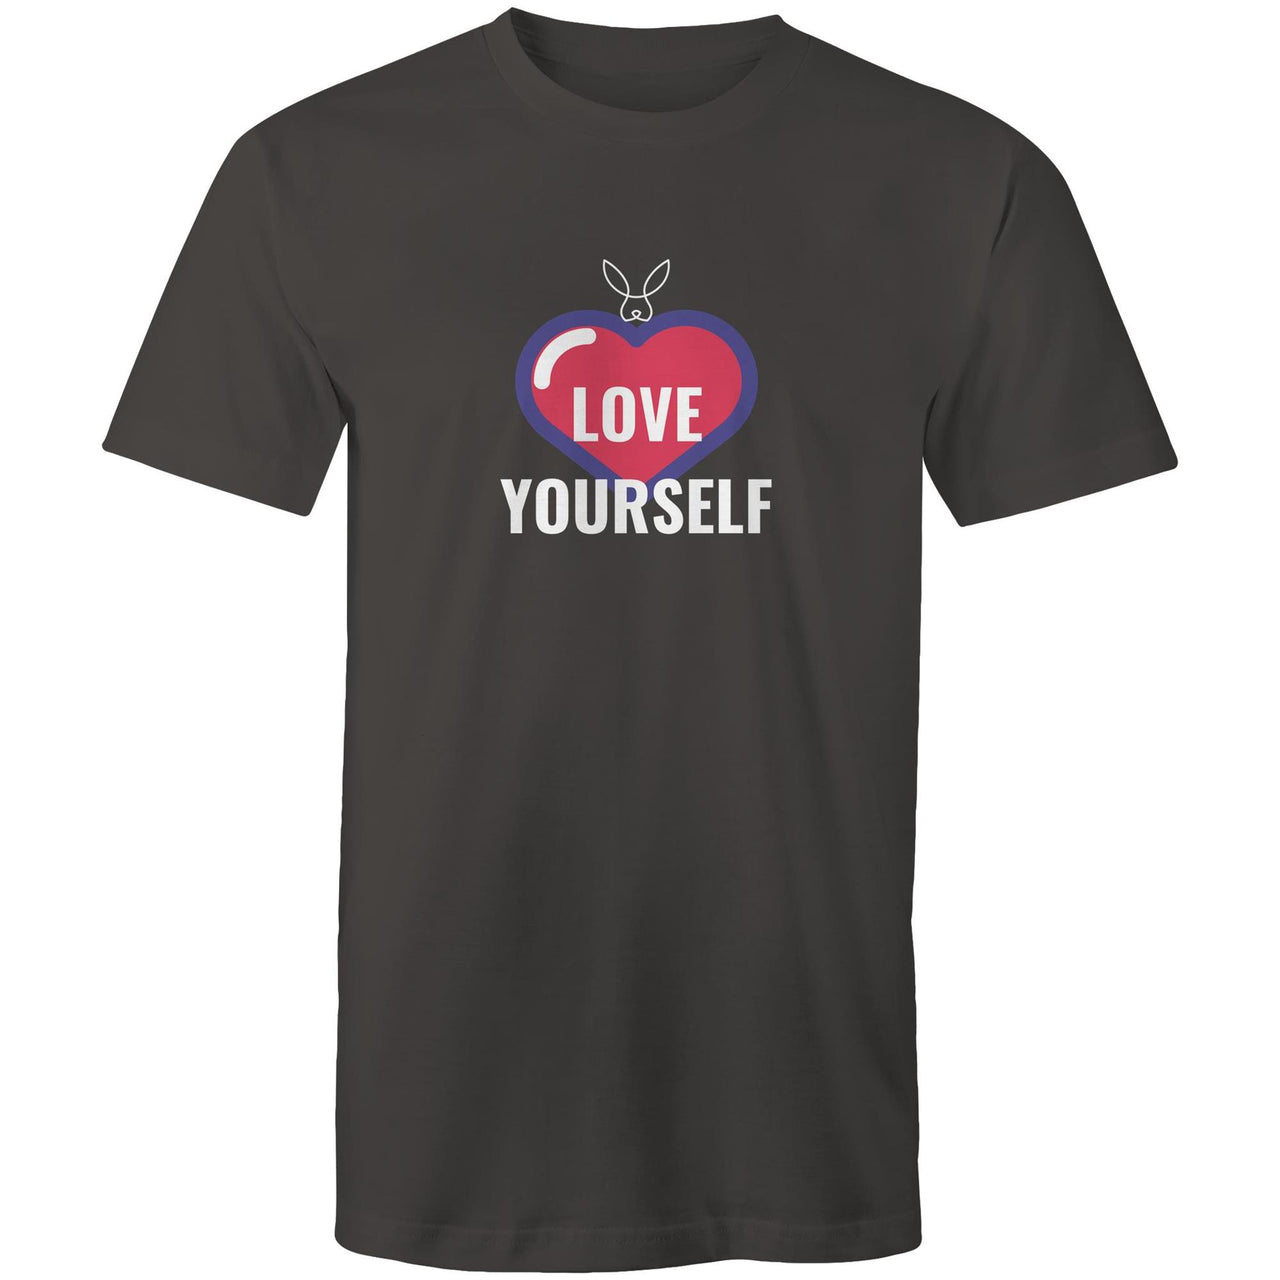 Love Yourself Crew T-Shirt by CBF Clothing Graphite